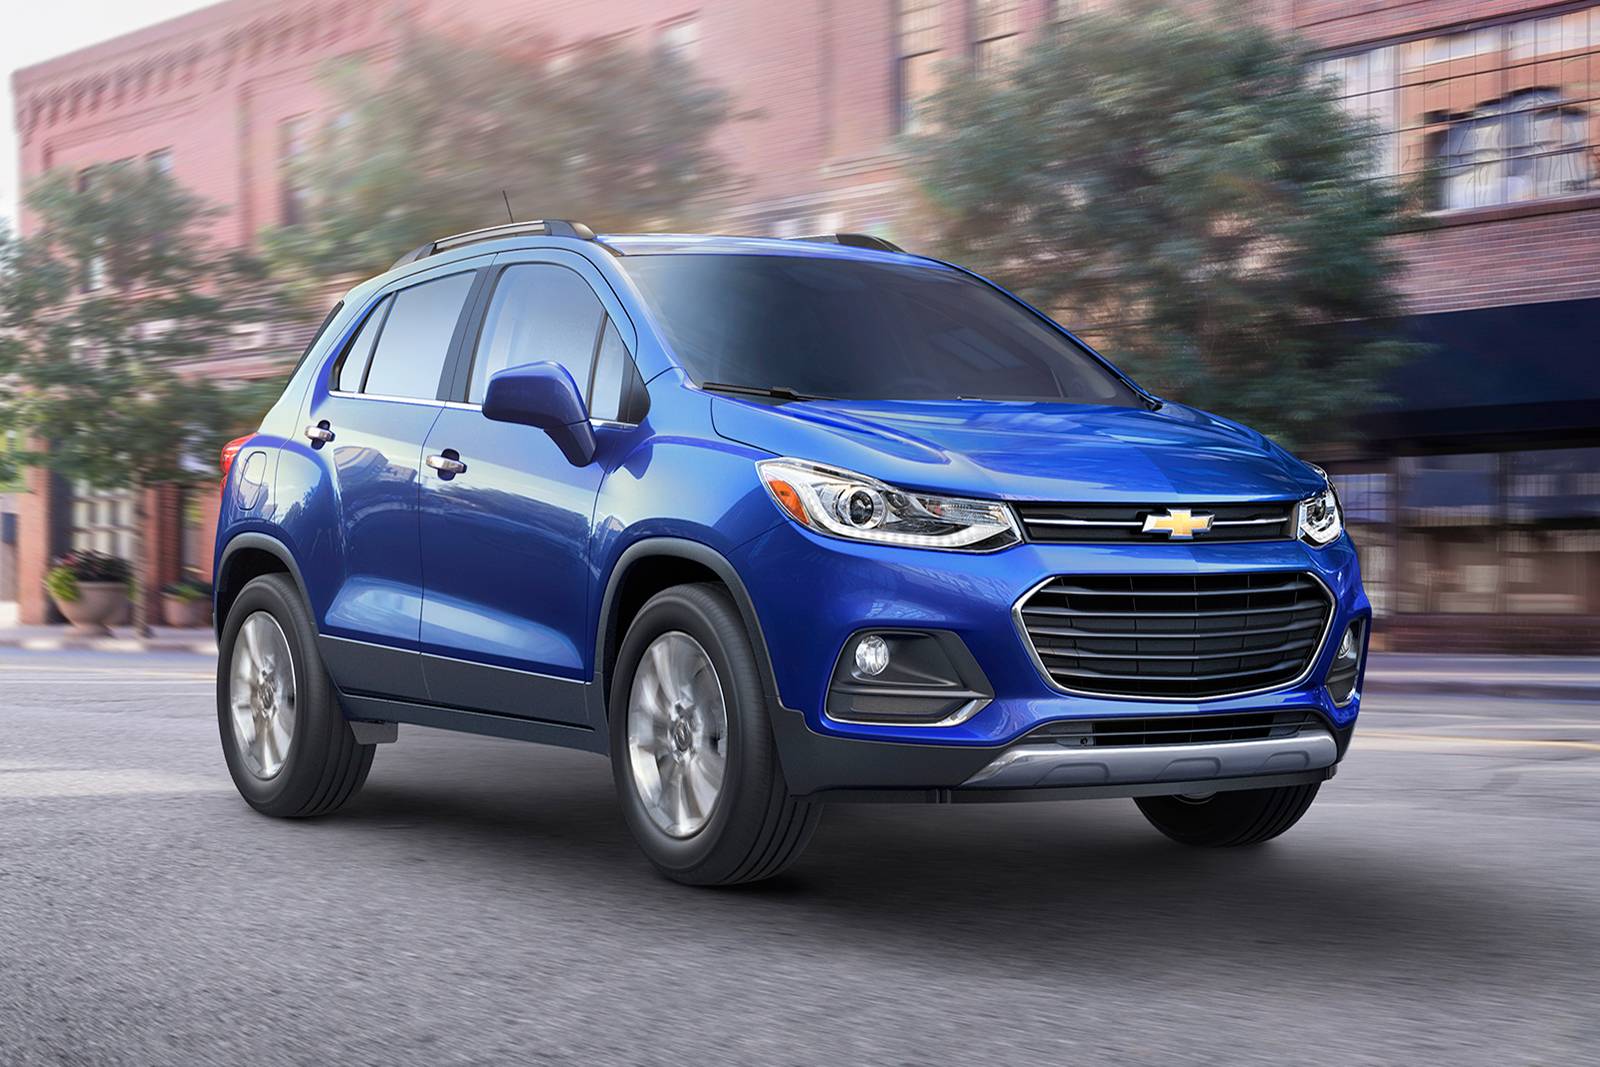 2020 Chevy Trax Review & Ratings | Edmunds